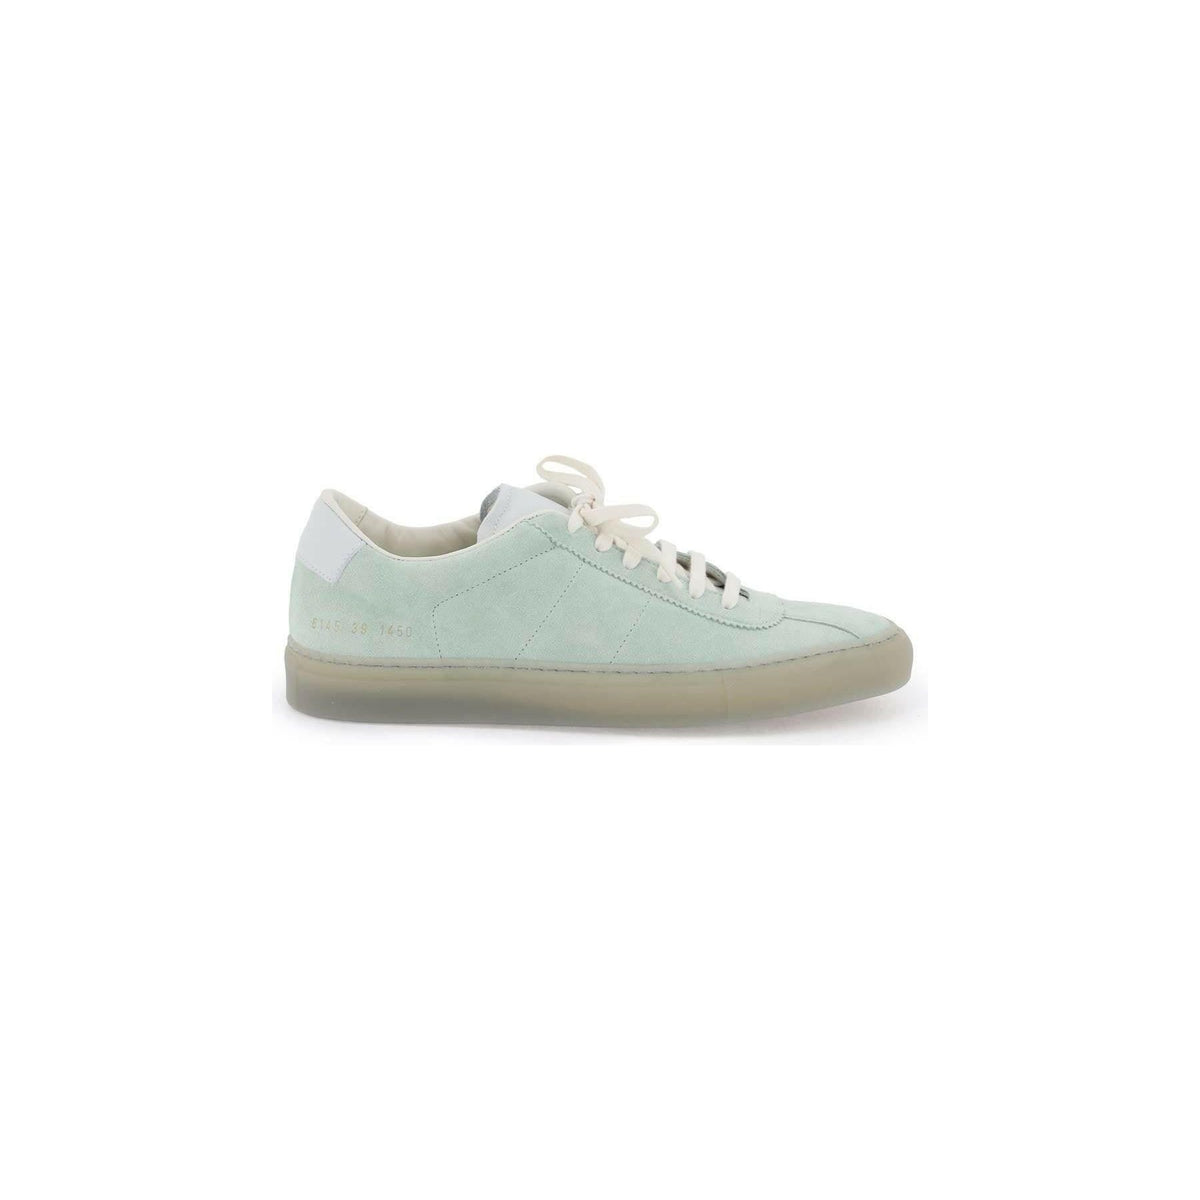 COMMON PROJECTS - Mint Green Suede Leather Sneakers - JOHN JULIA